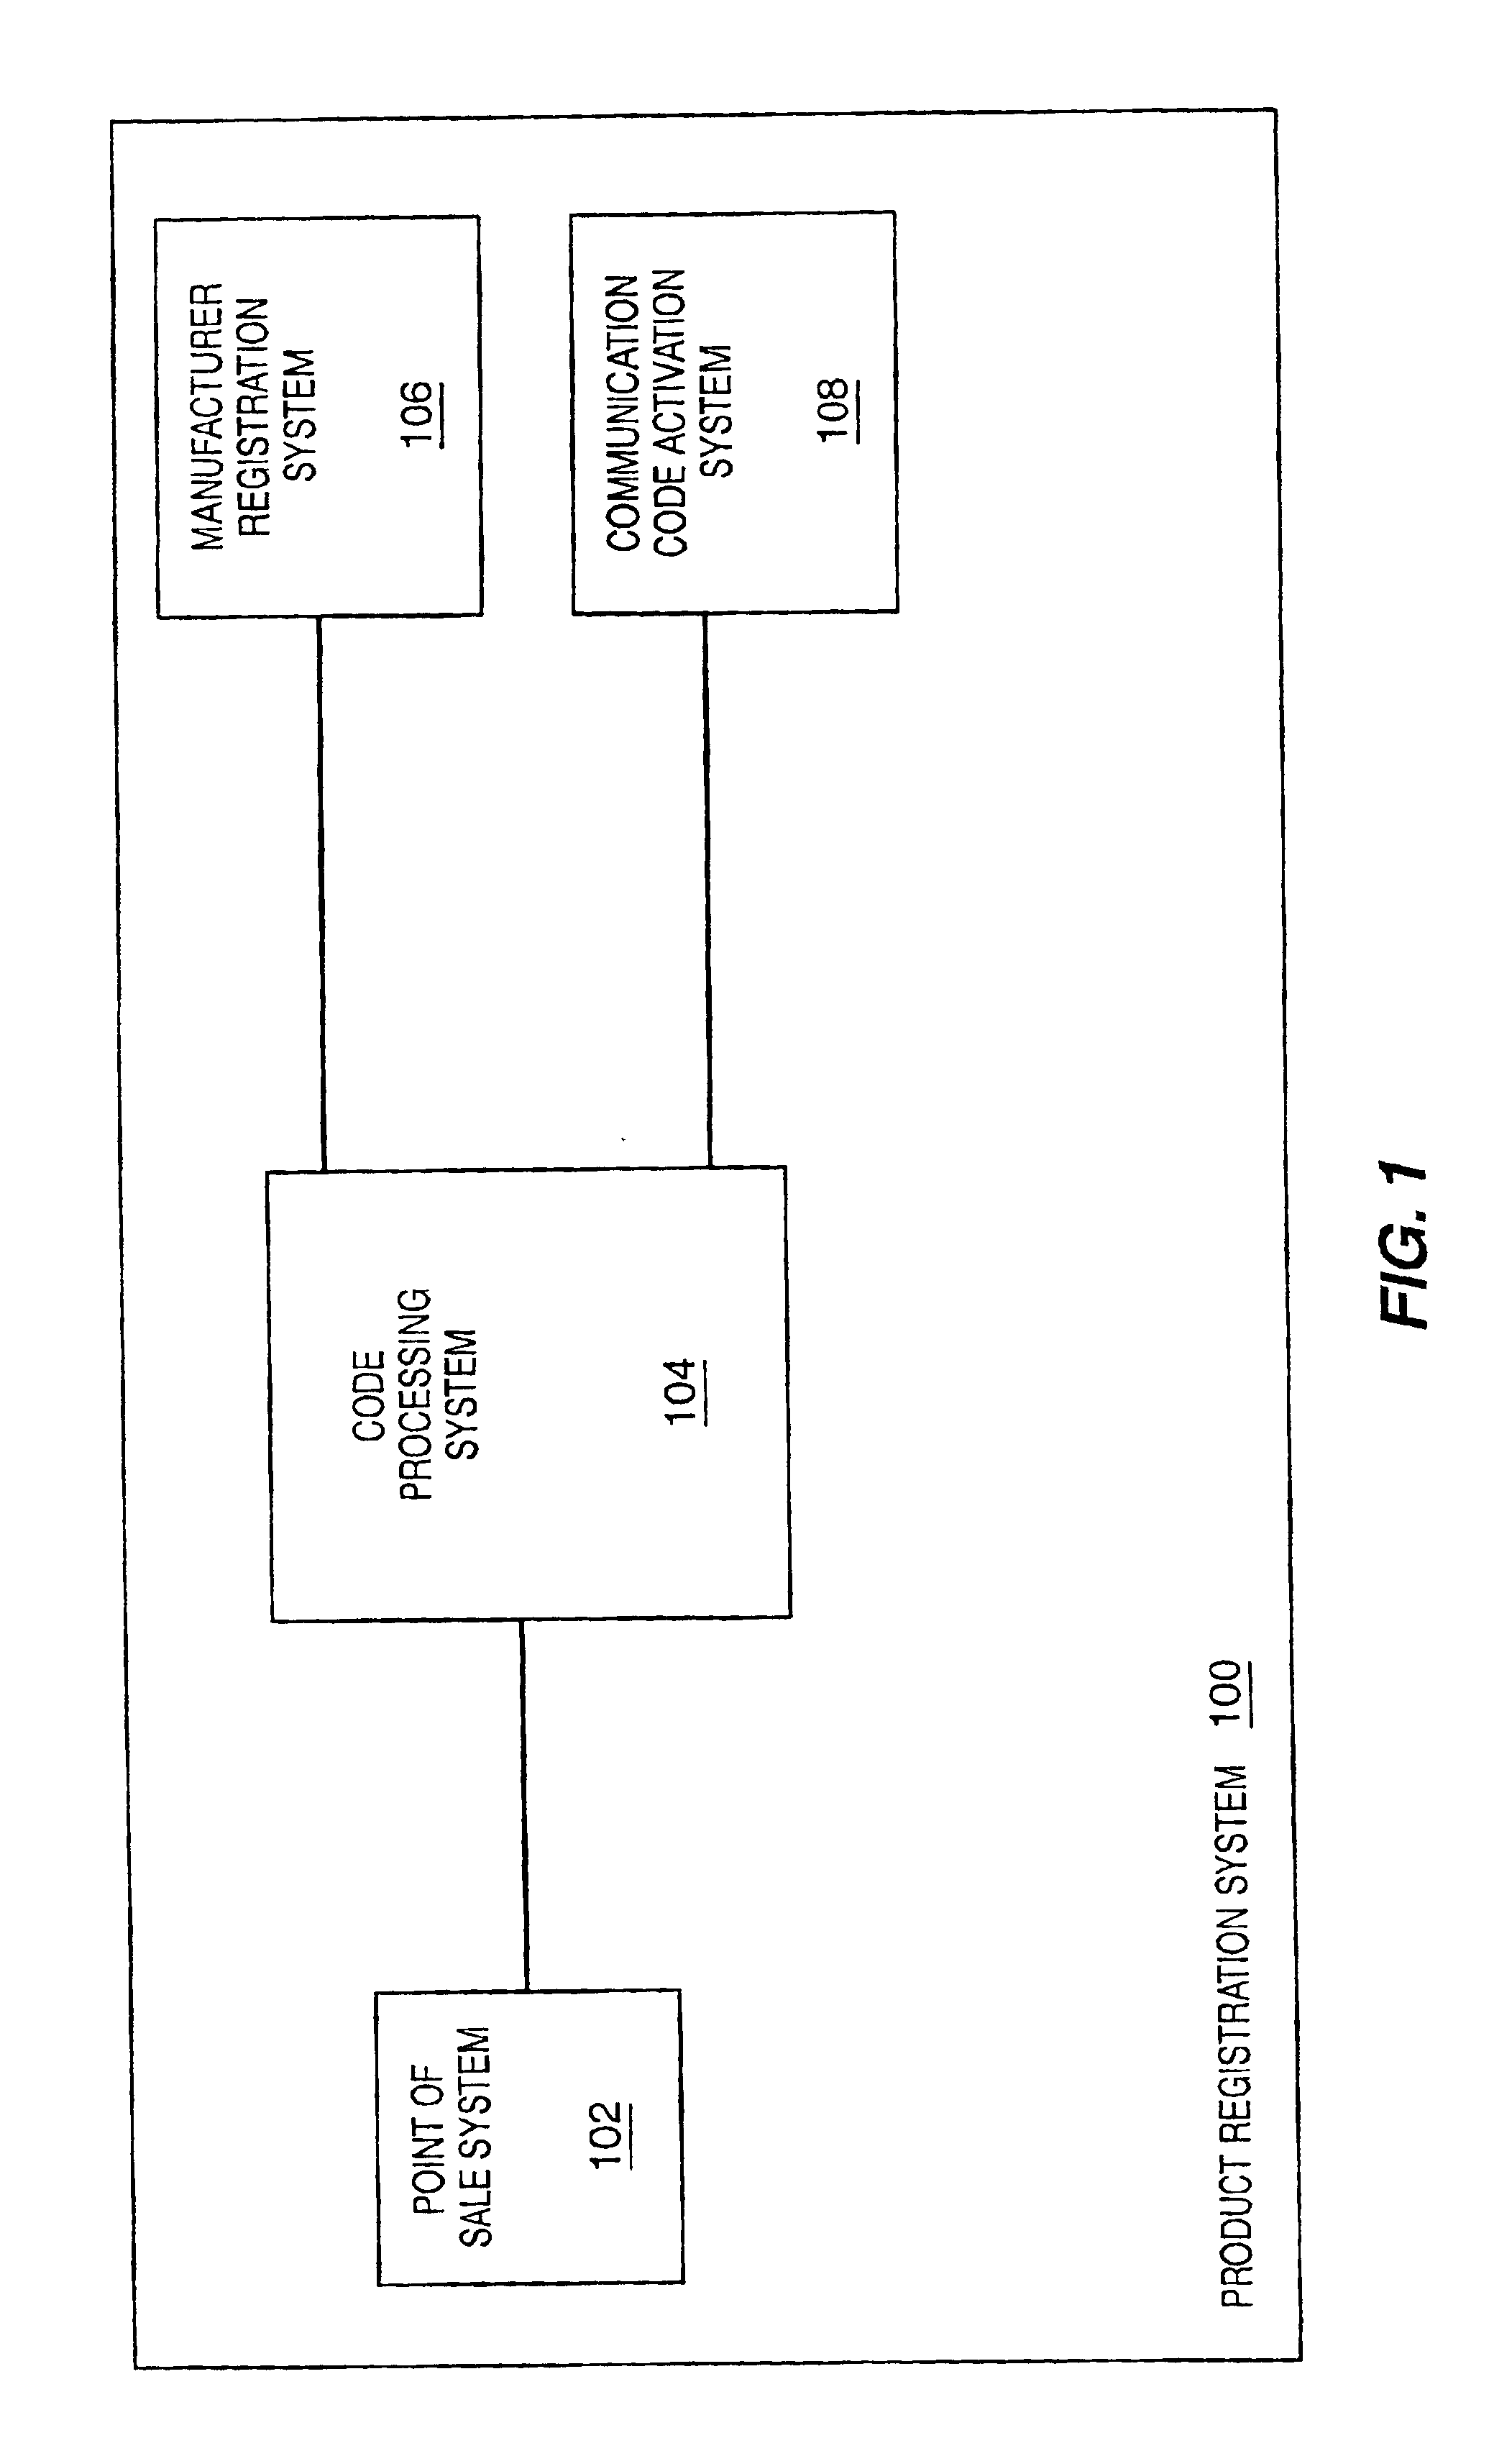 Product registration using a code processing system